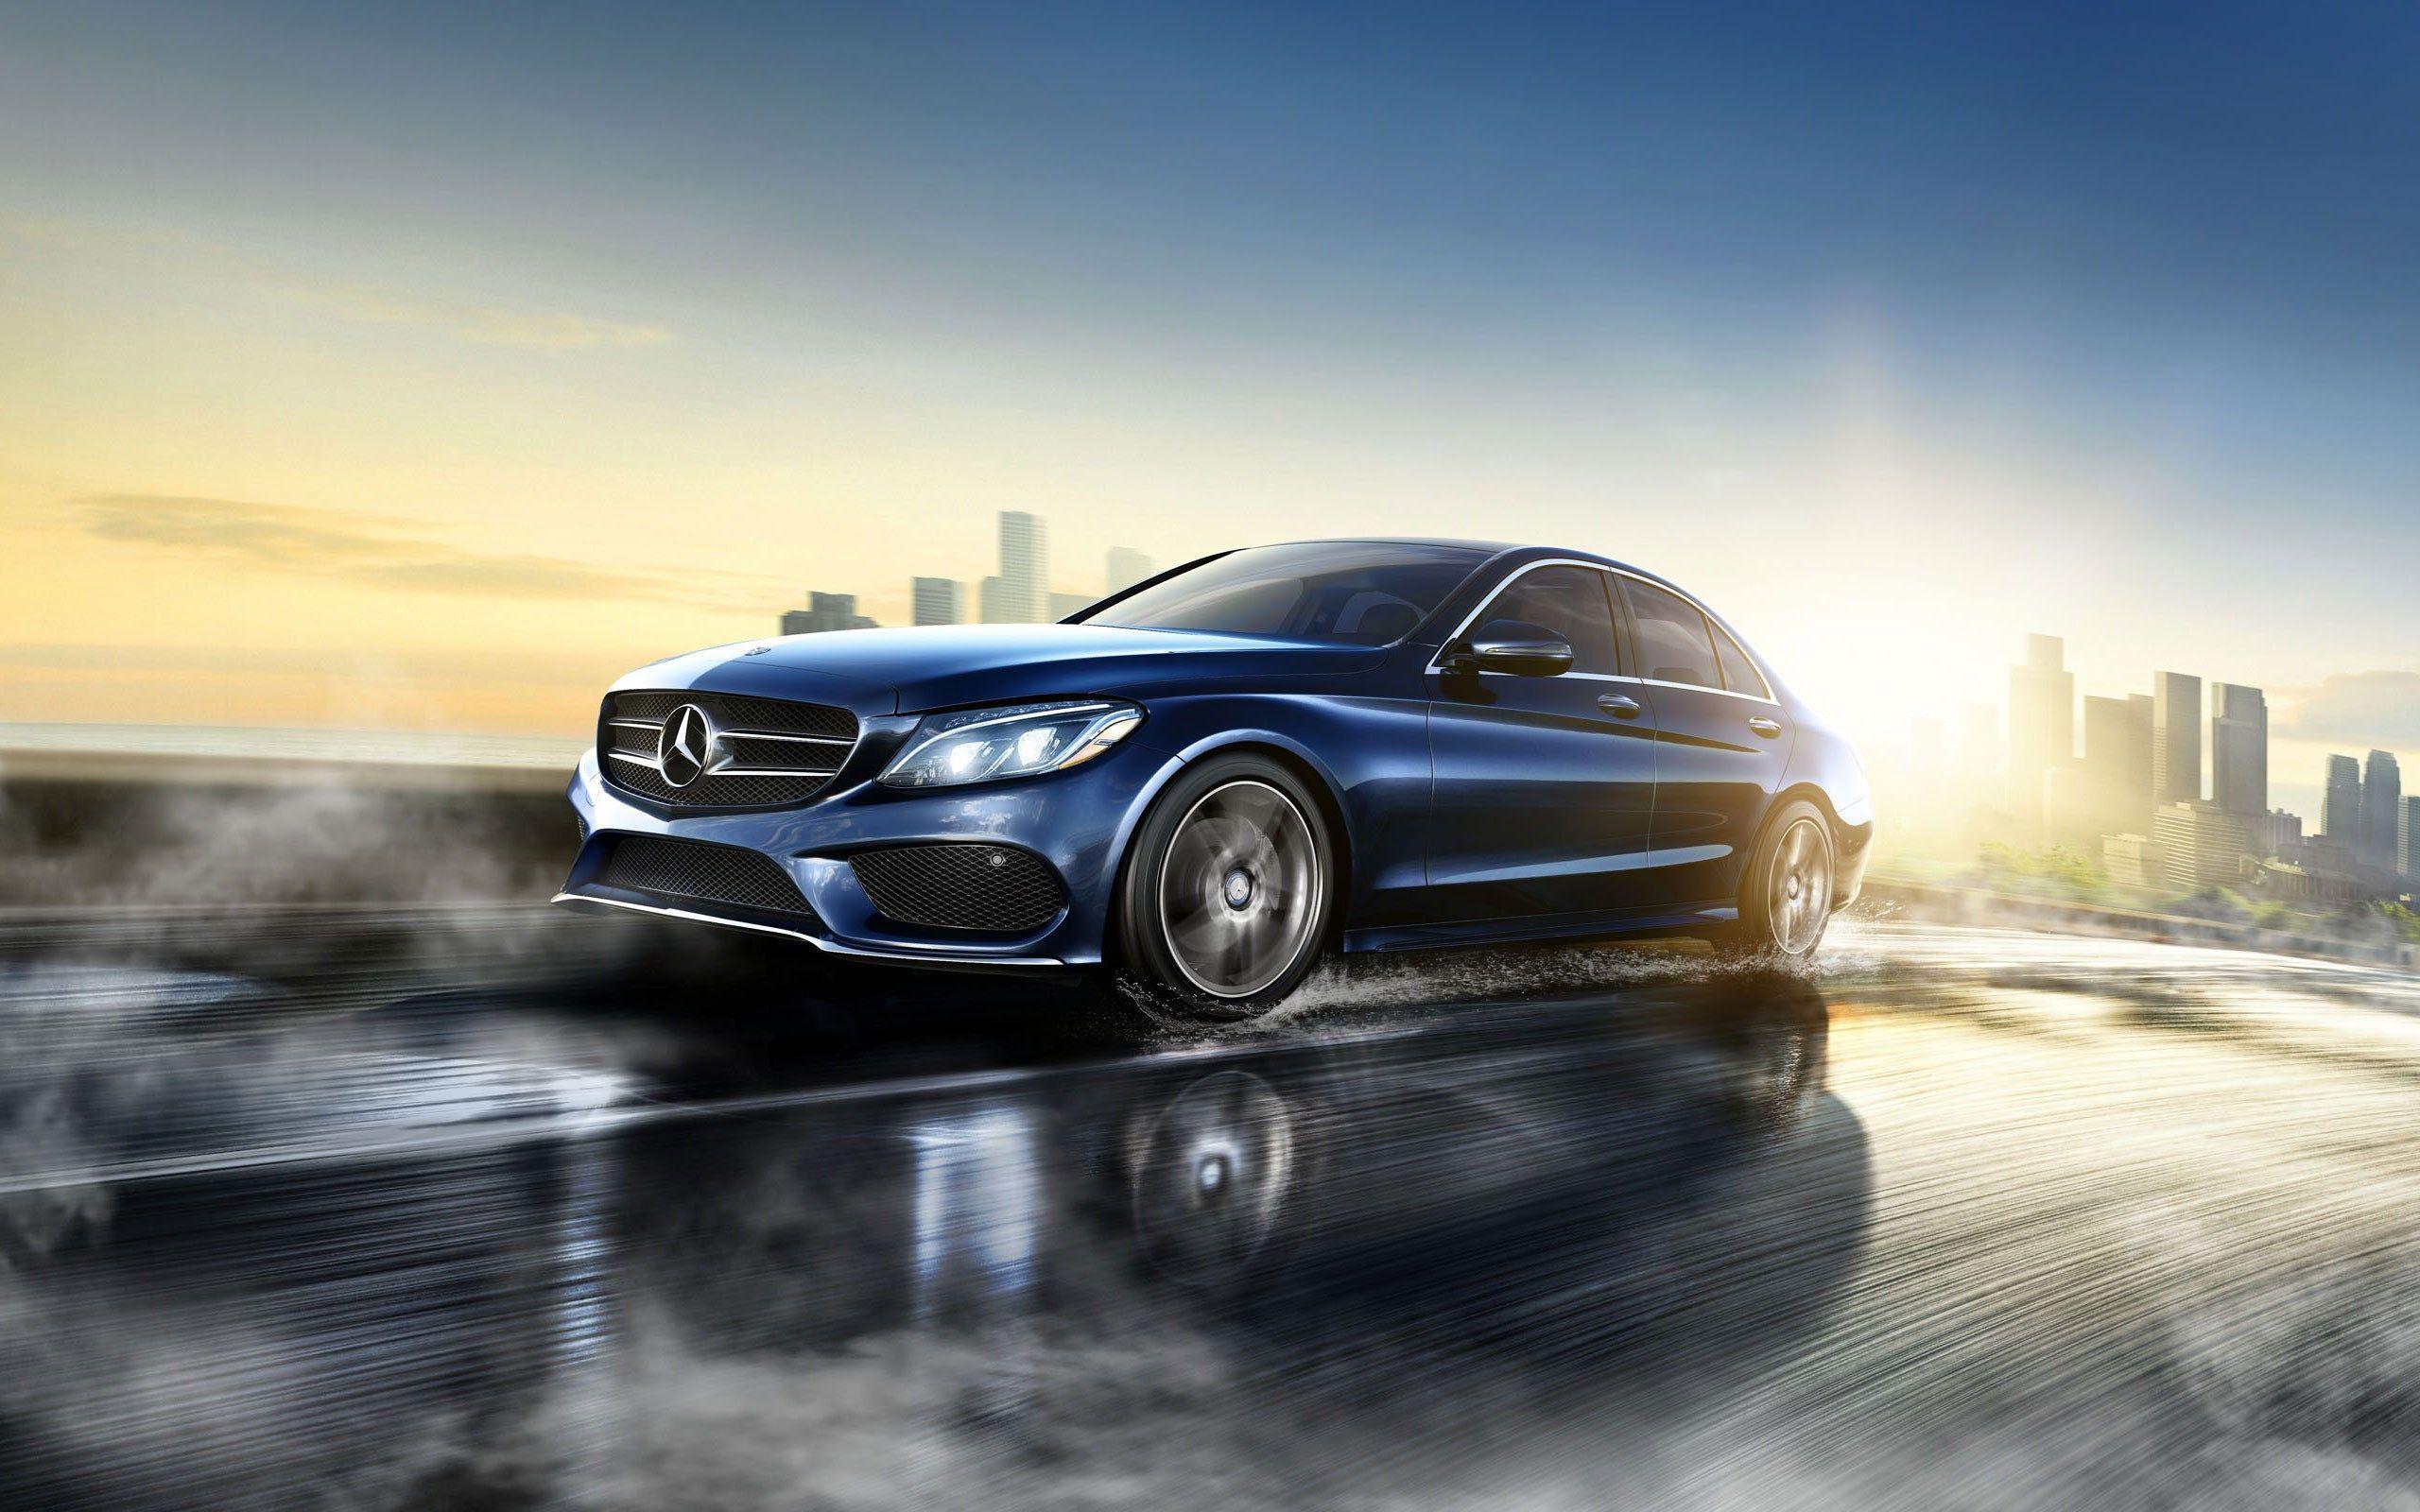 Mercedes C300 Wallpapers Top Free Mercedes C300 Backgrounds Wallpaperaccess